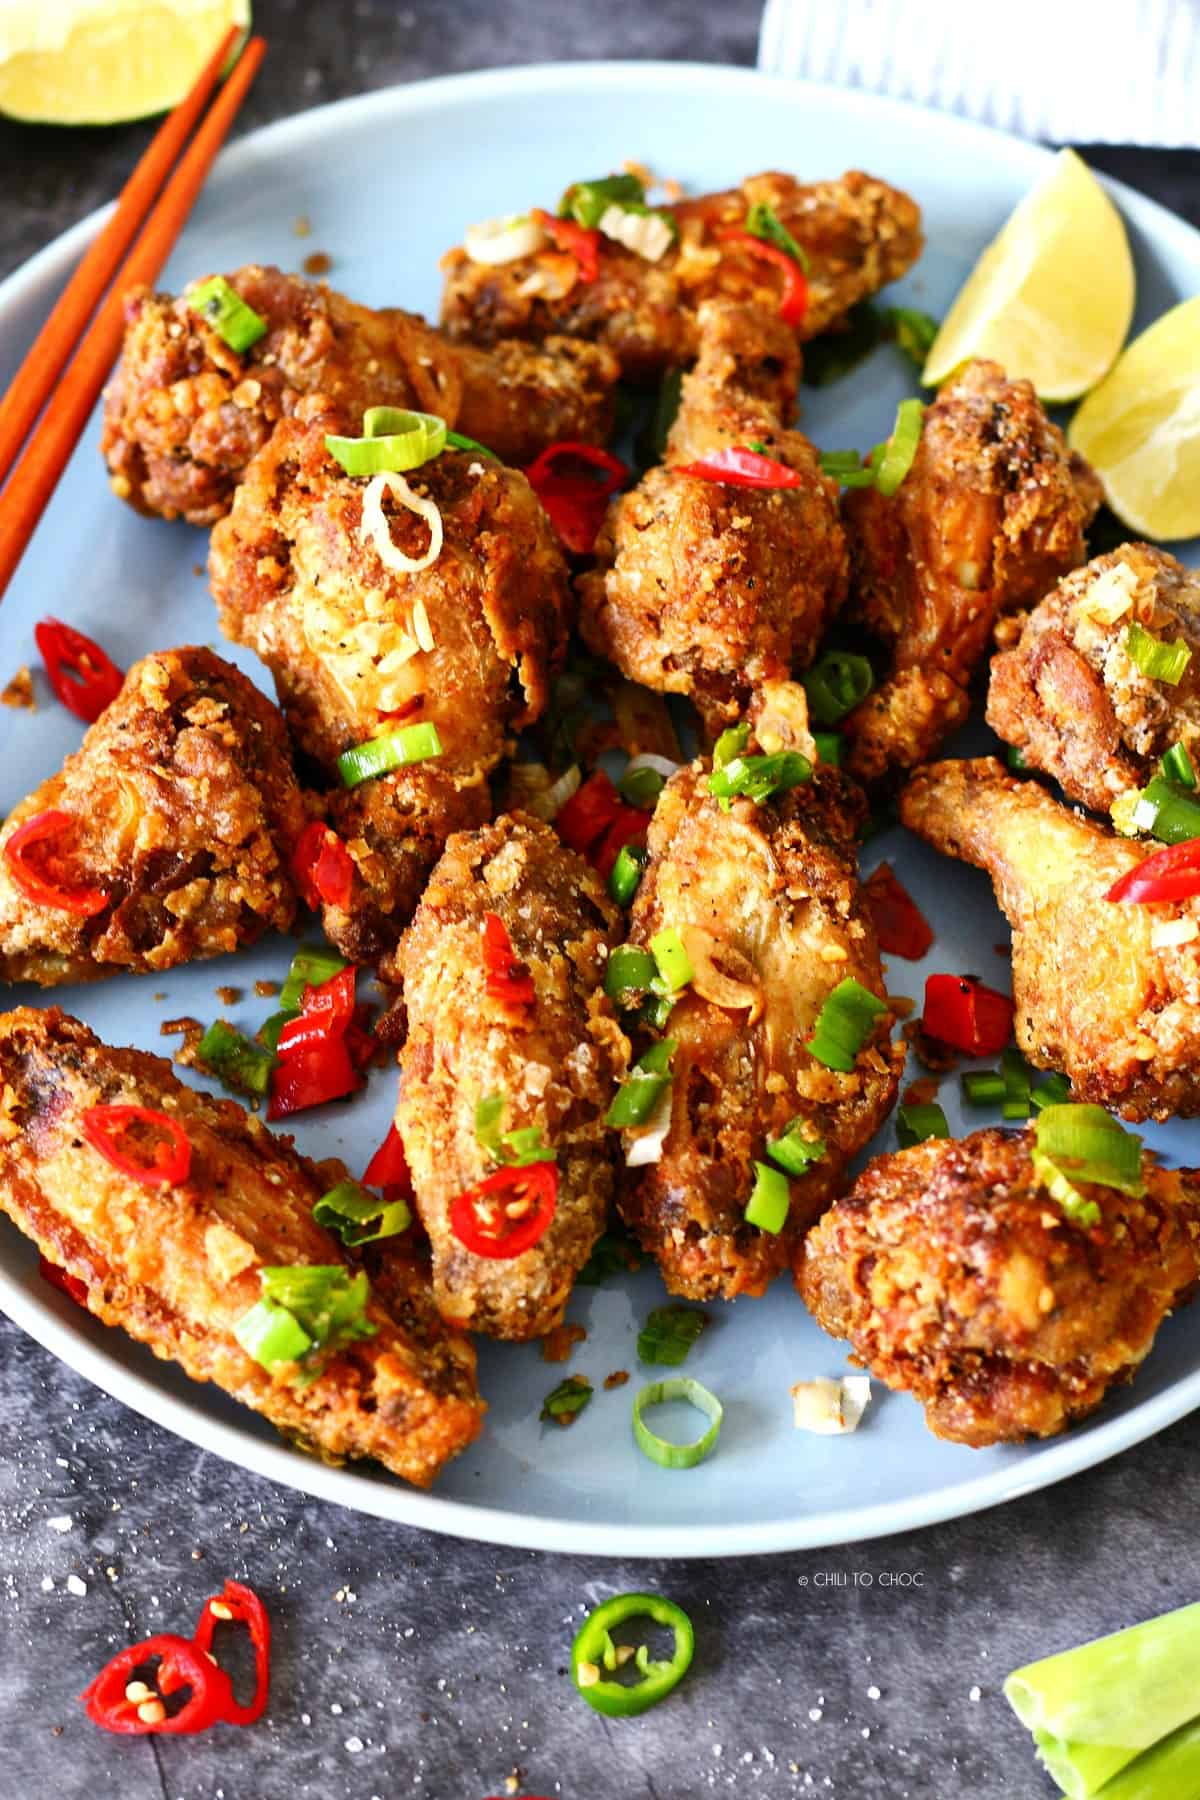 Salt and pepper chicken wings garnished with sliced spring onion, garlic and chilies and lemon wedges on the side.